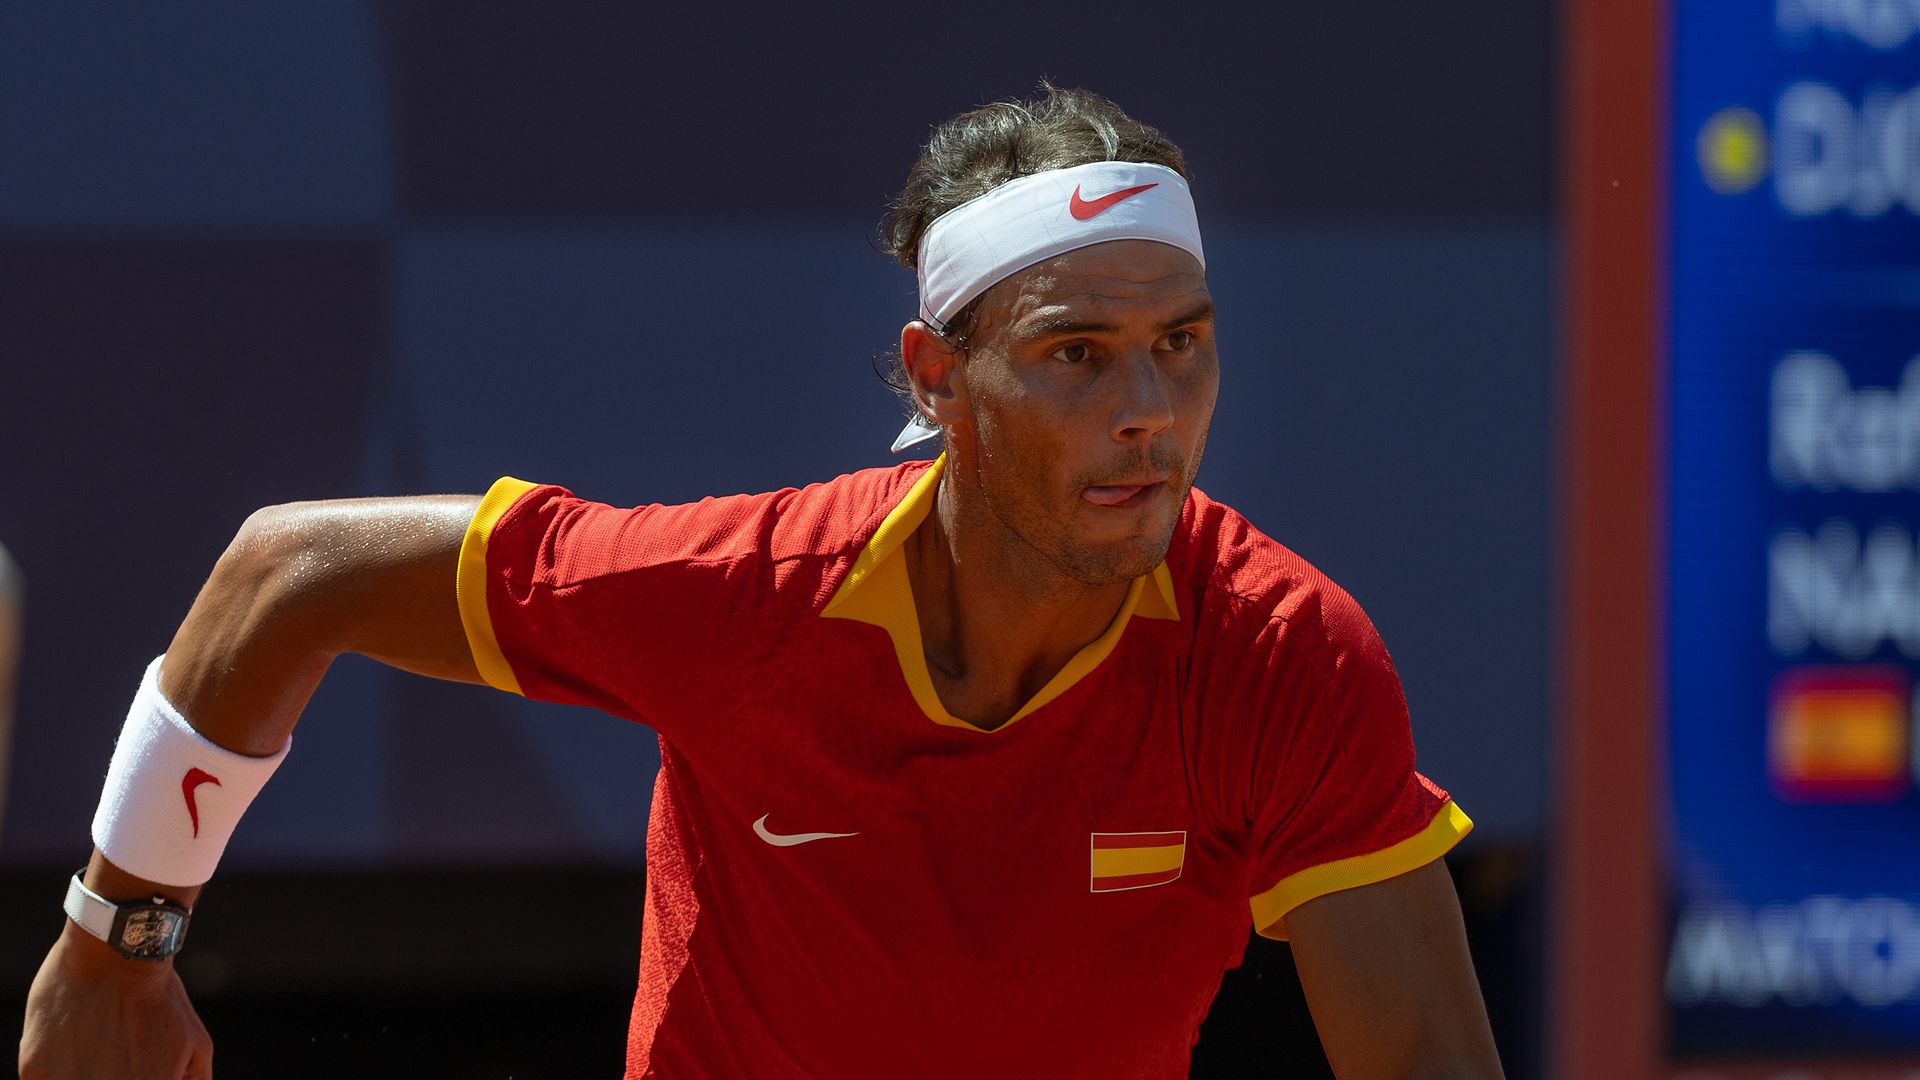 Rafael Nadal had the support of his family during his devastating loss